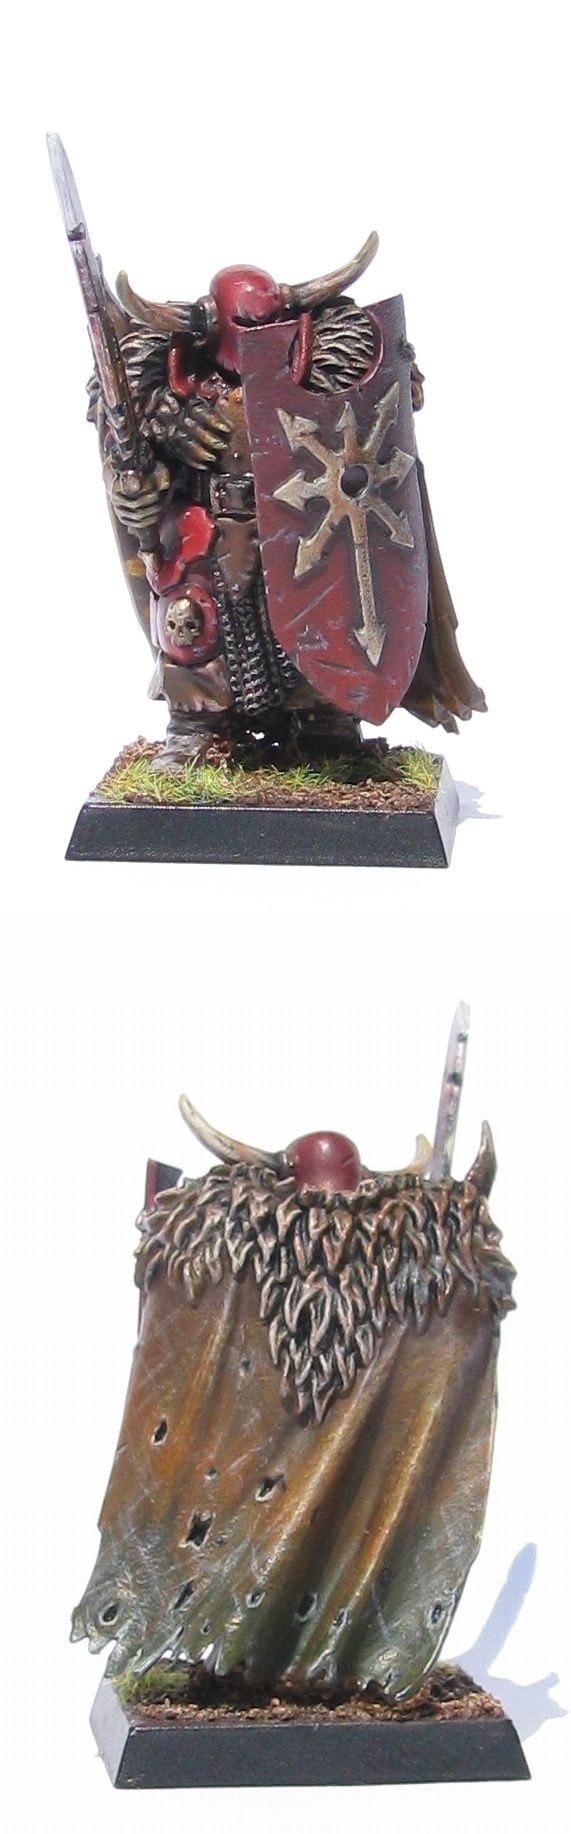 Chaos Warrior updated